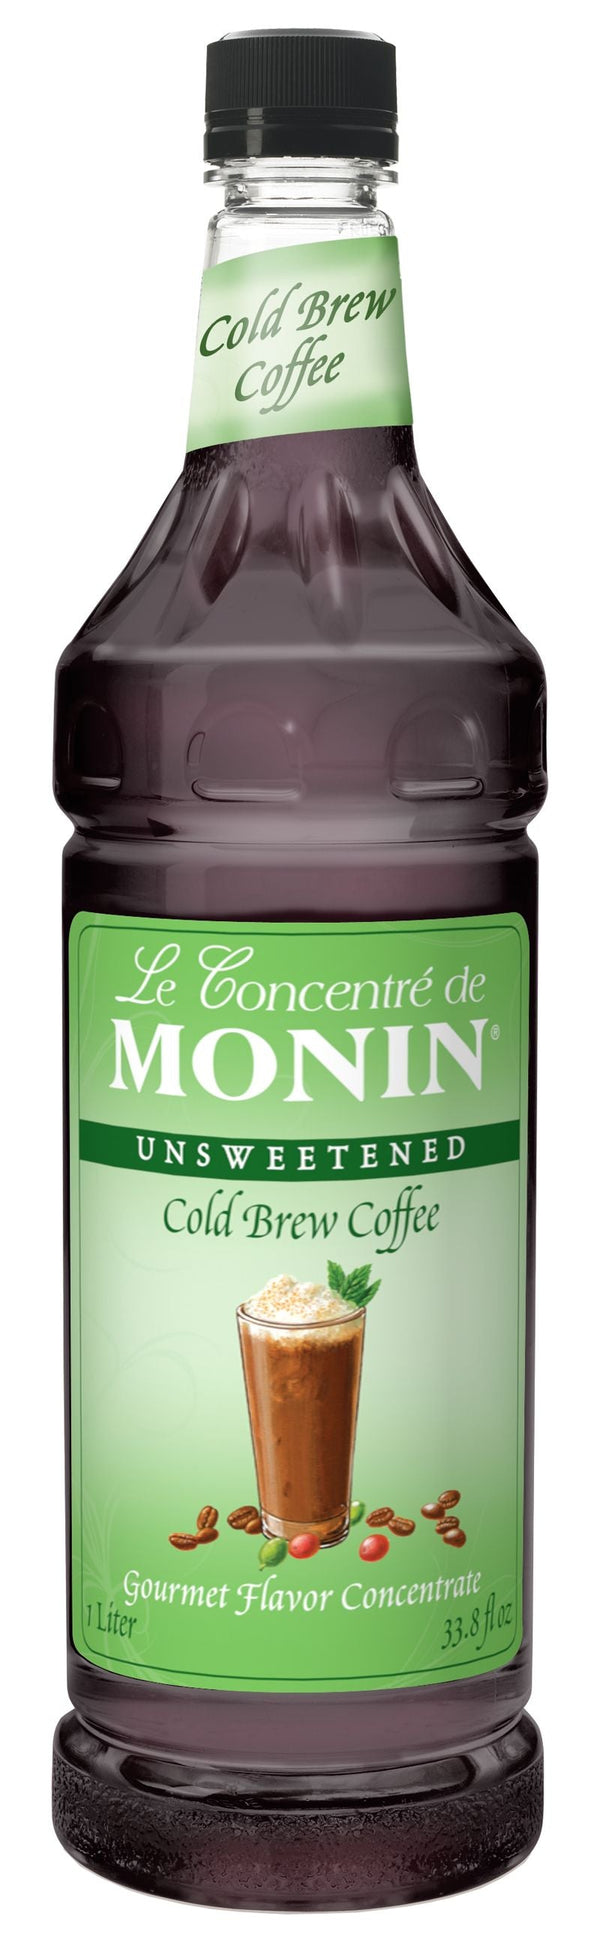 Monin Cold Brew Coffee Concentrate 1 liter - High-quality Beverages by Monin at 